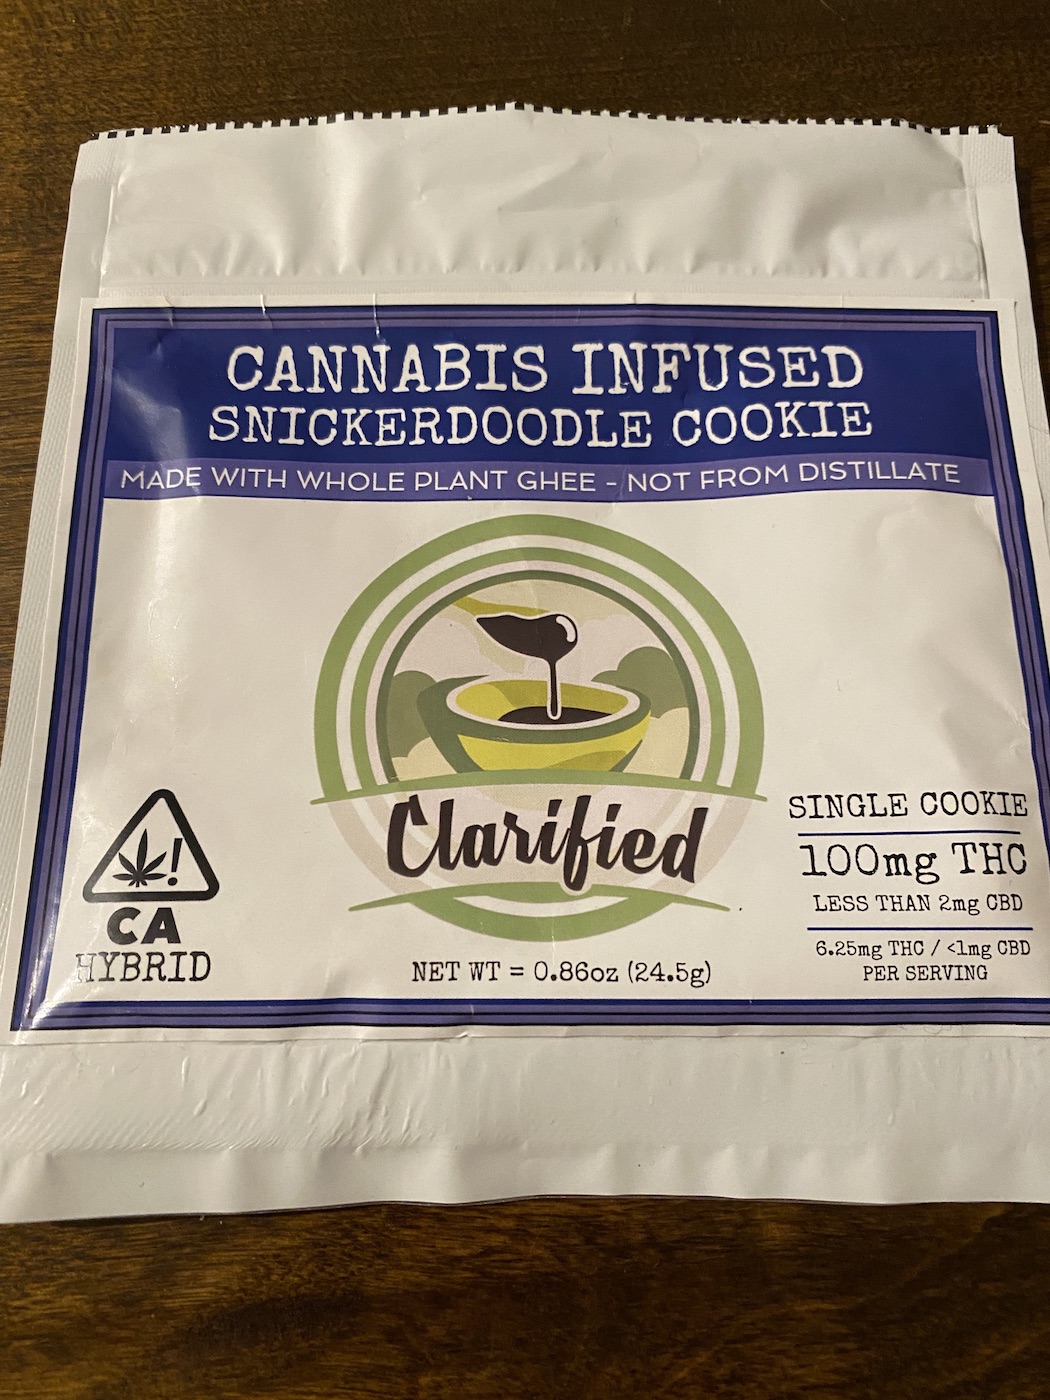 clarified snickerdoodle weed edible package